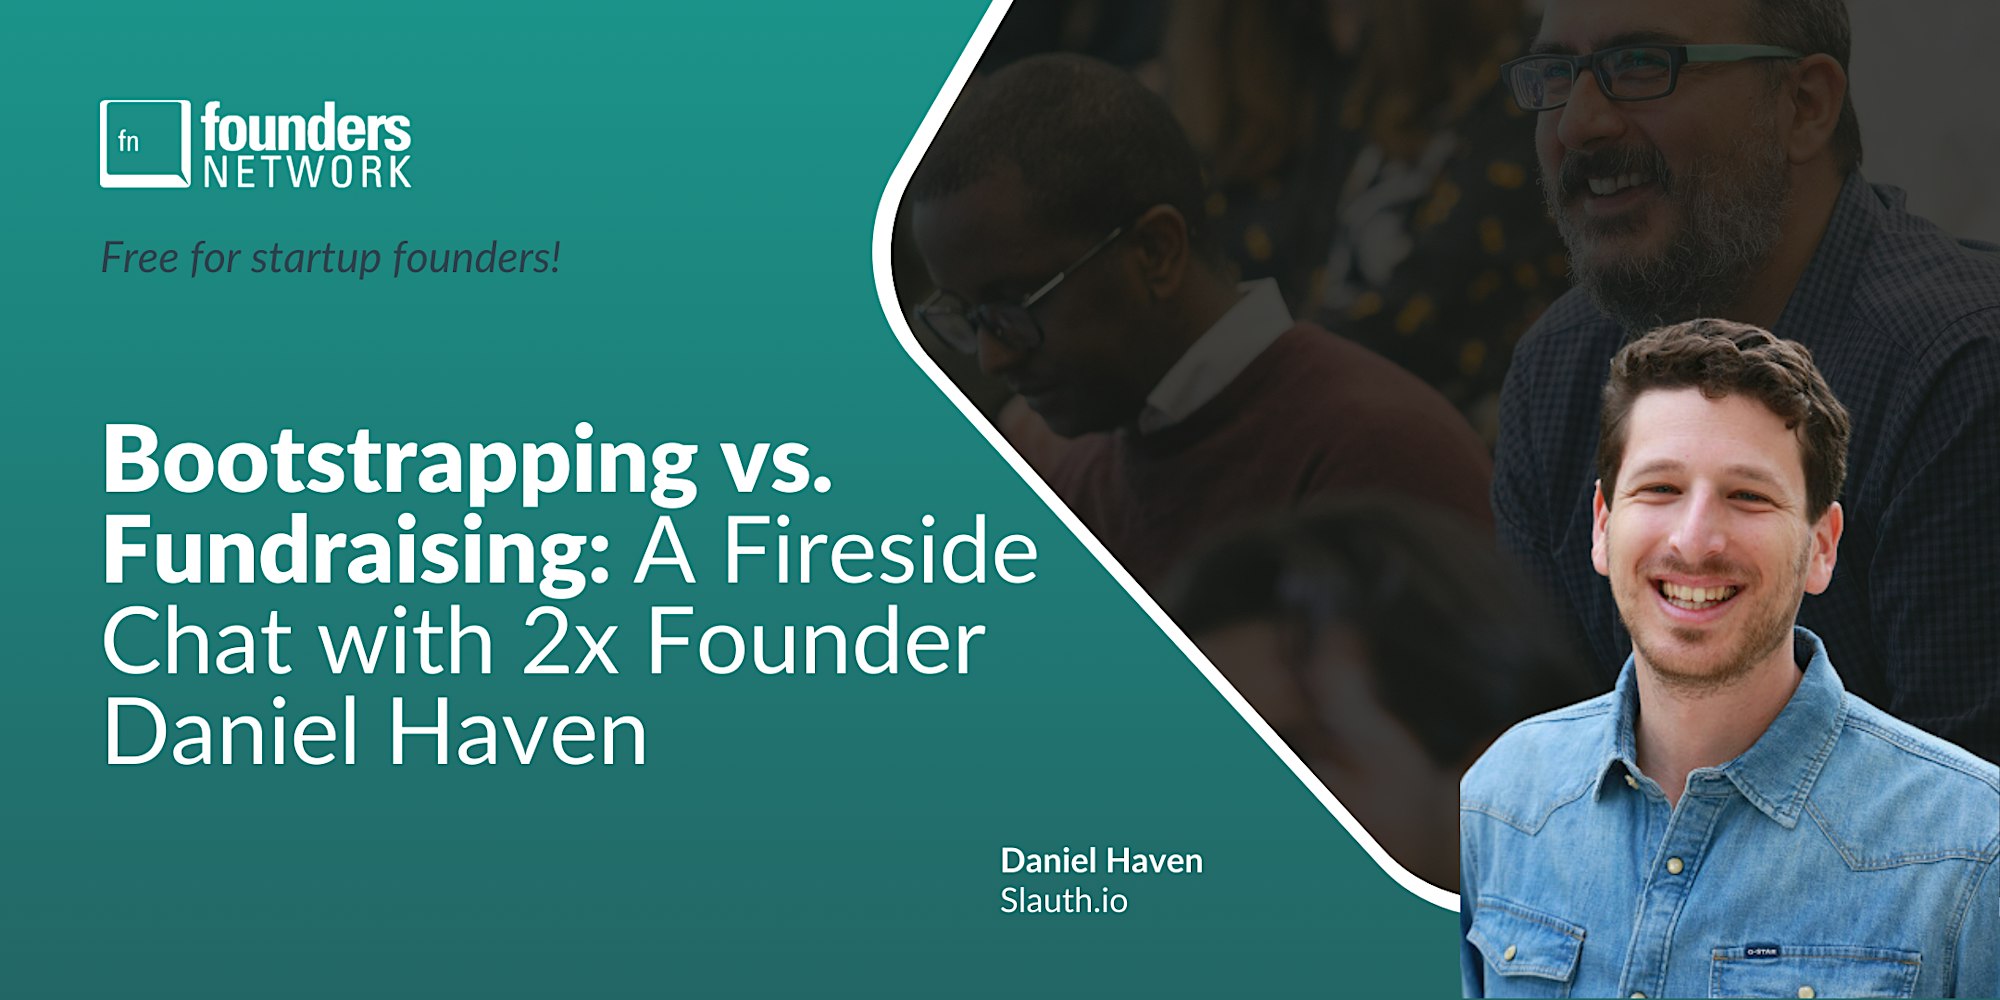 Featured image for “Bootstrapping vs. Fundraising: A Fireside Chat with 2x Founder Daniel Haven”